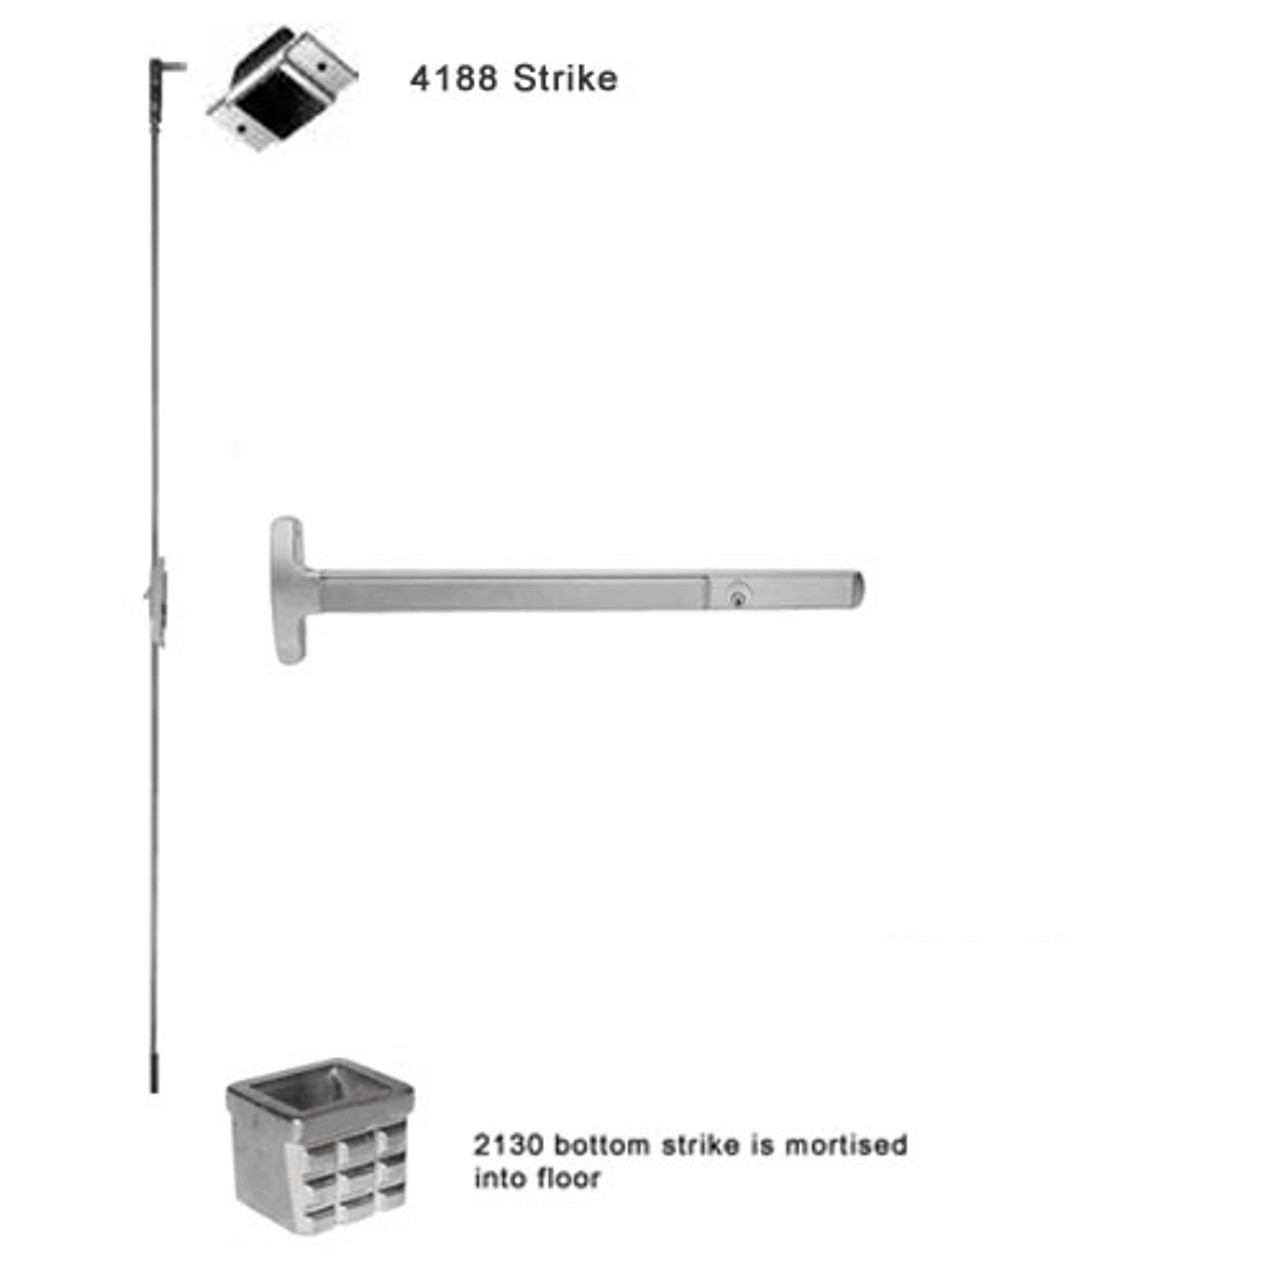 CD24-C-L-BE-DANE-US19-3-LHR Falcon 24 Series Concealed Vertical Rod Device 712L-BE Dane Lever Trim with Blank Escutcheon in Flat Black Painted